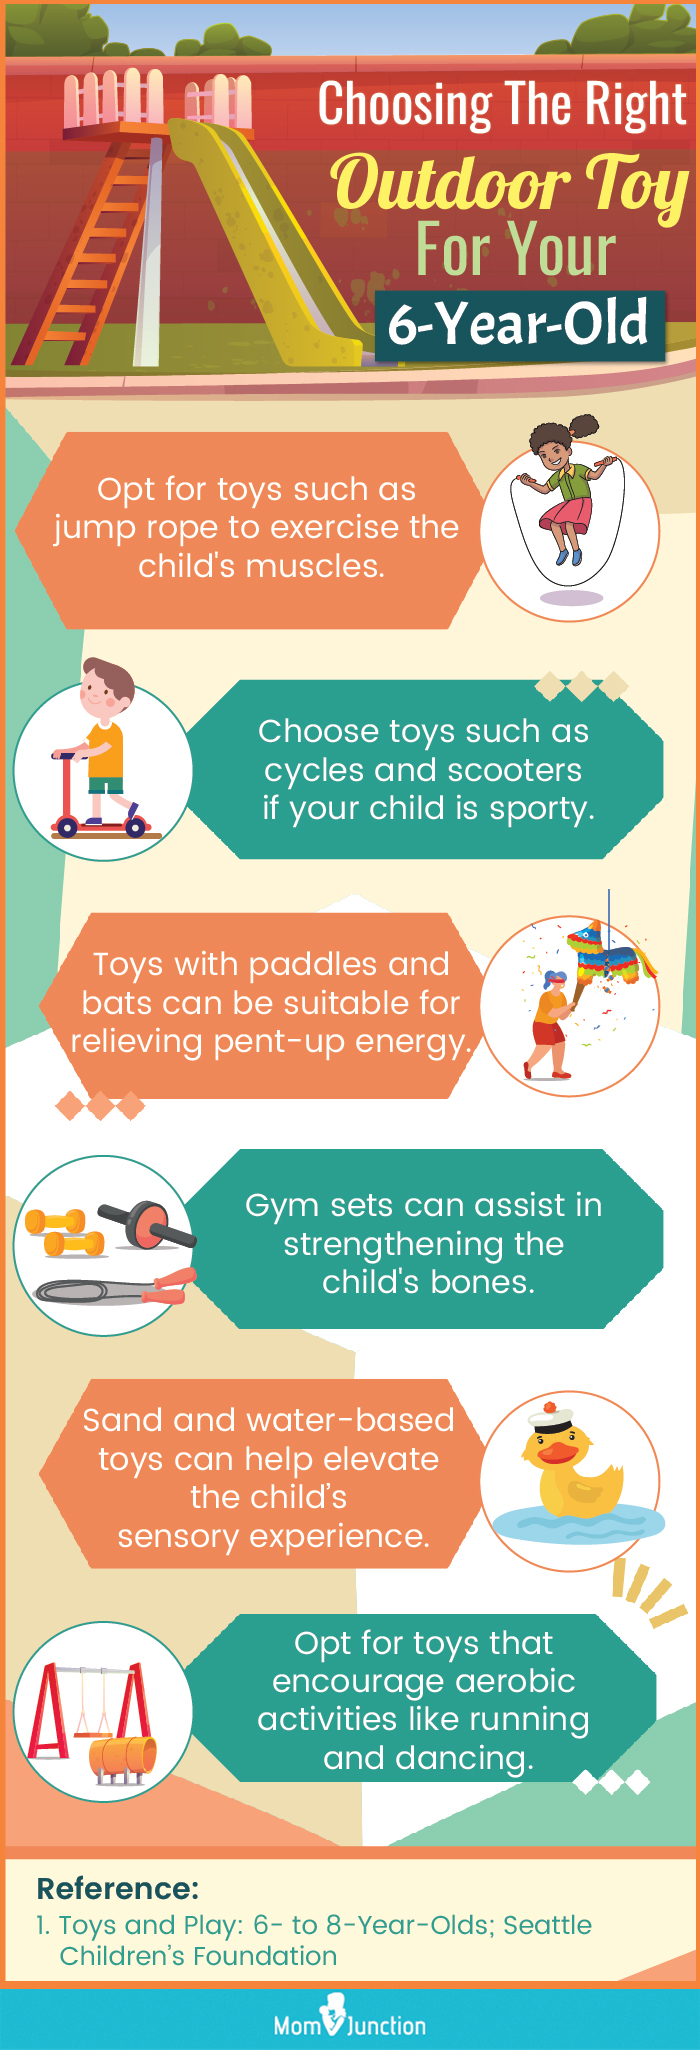 Toys and Play: 6- to 8-Year-Olds - Seattle Children's